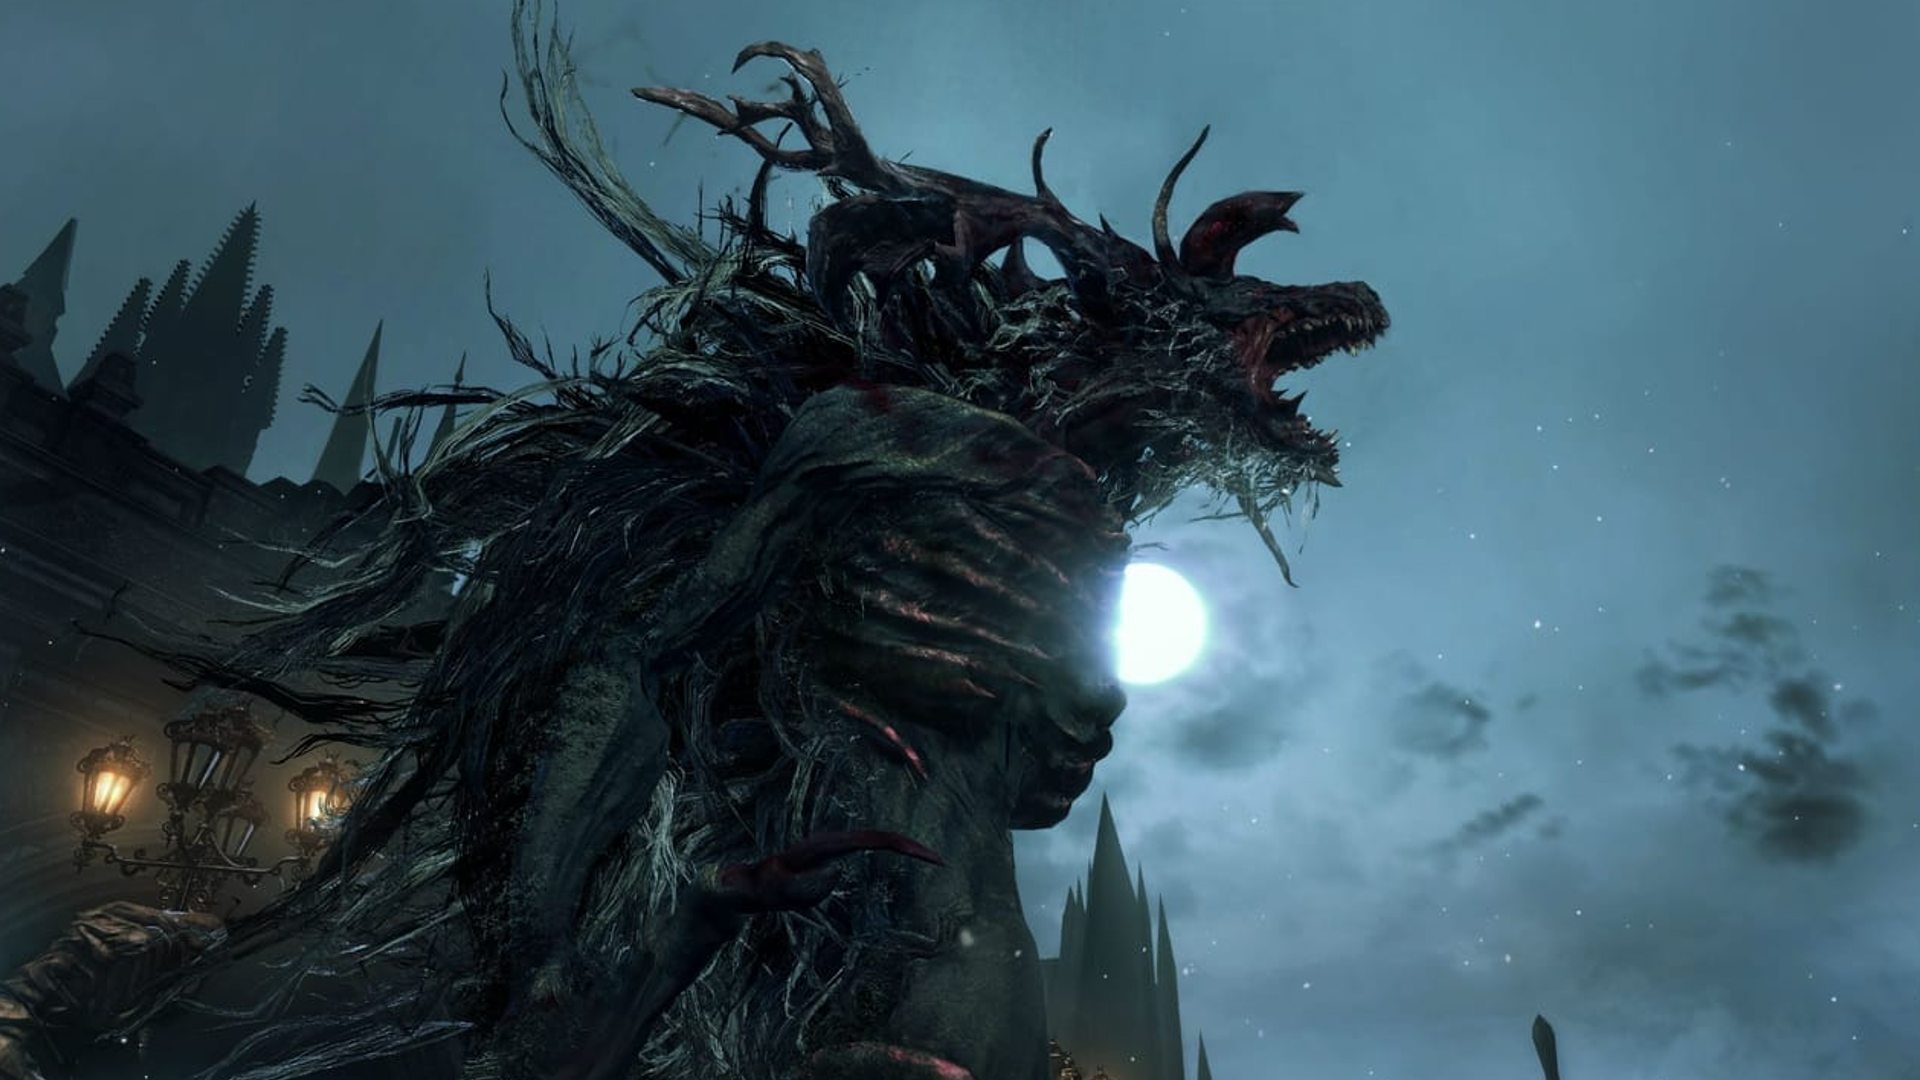 The Cleric Beast can be seen